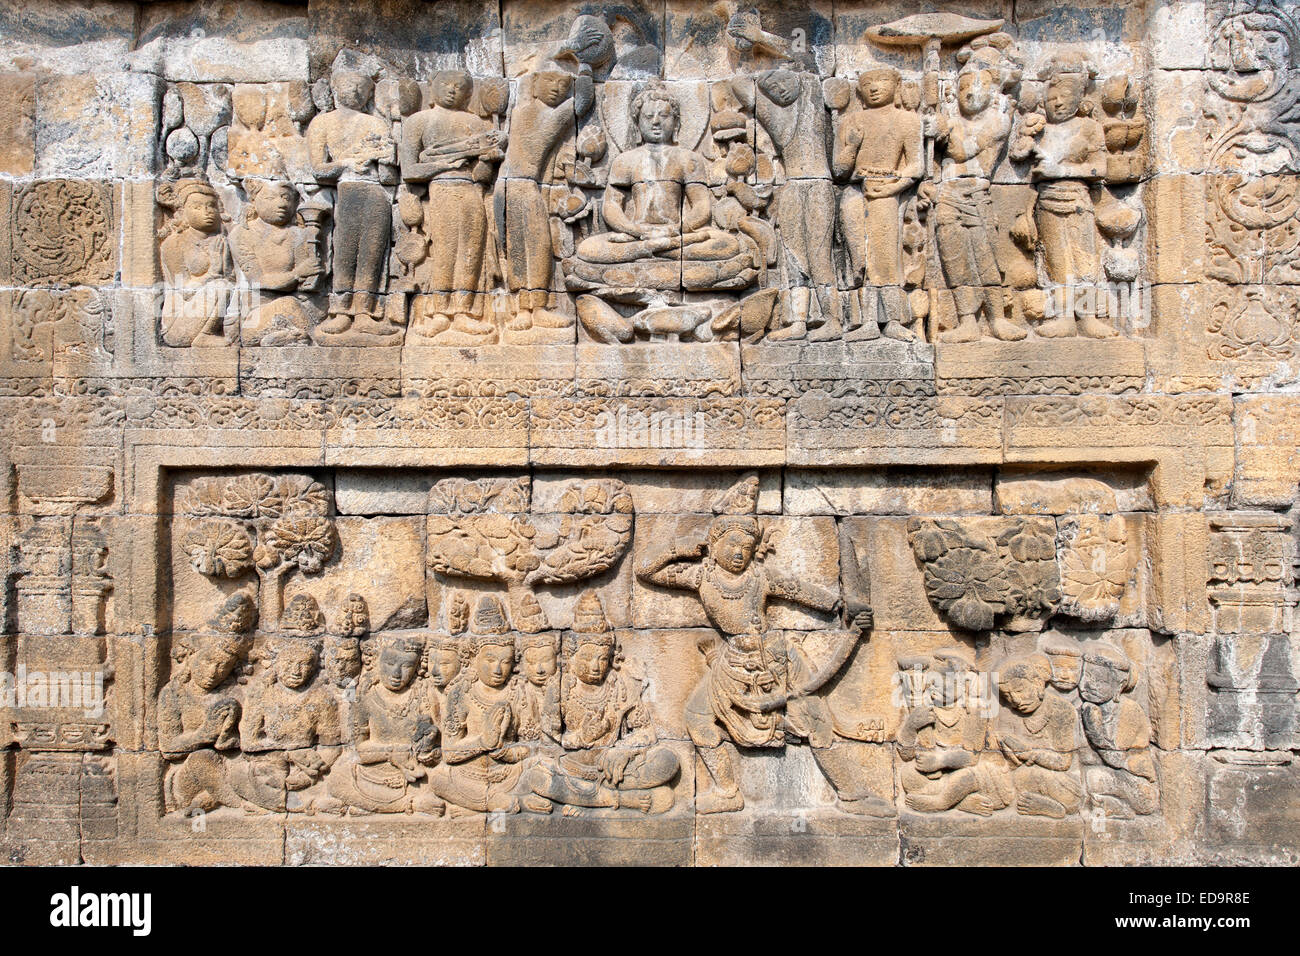 Karmawibhangga bas reliefs (160 of them) carved in the stone of Borobodur, a 9th-century Buddhist Temple in Magelang, Indonesia. Stock Photo